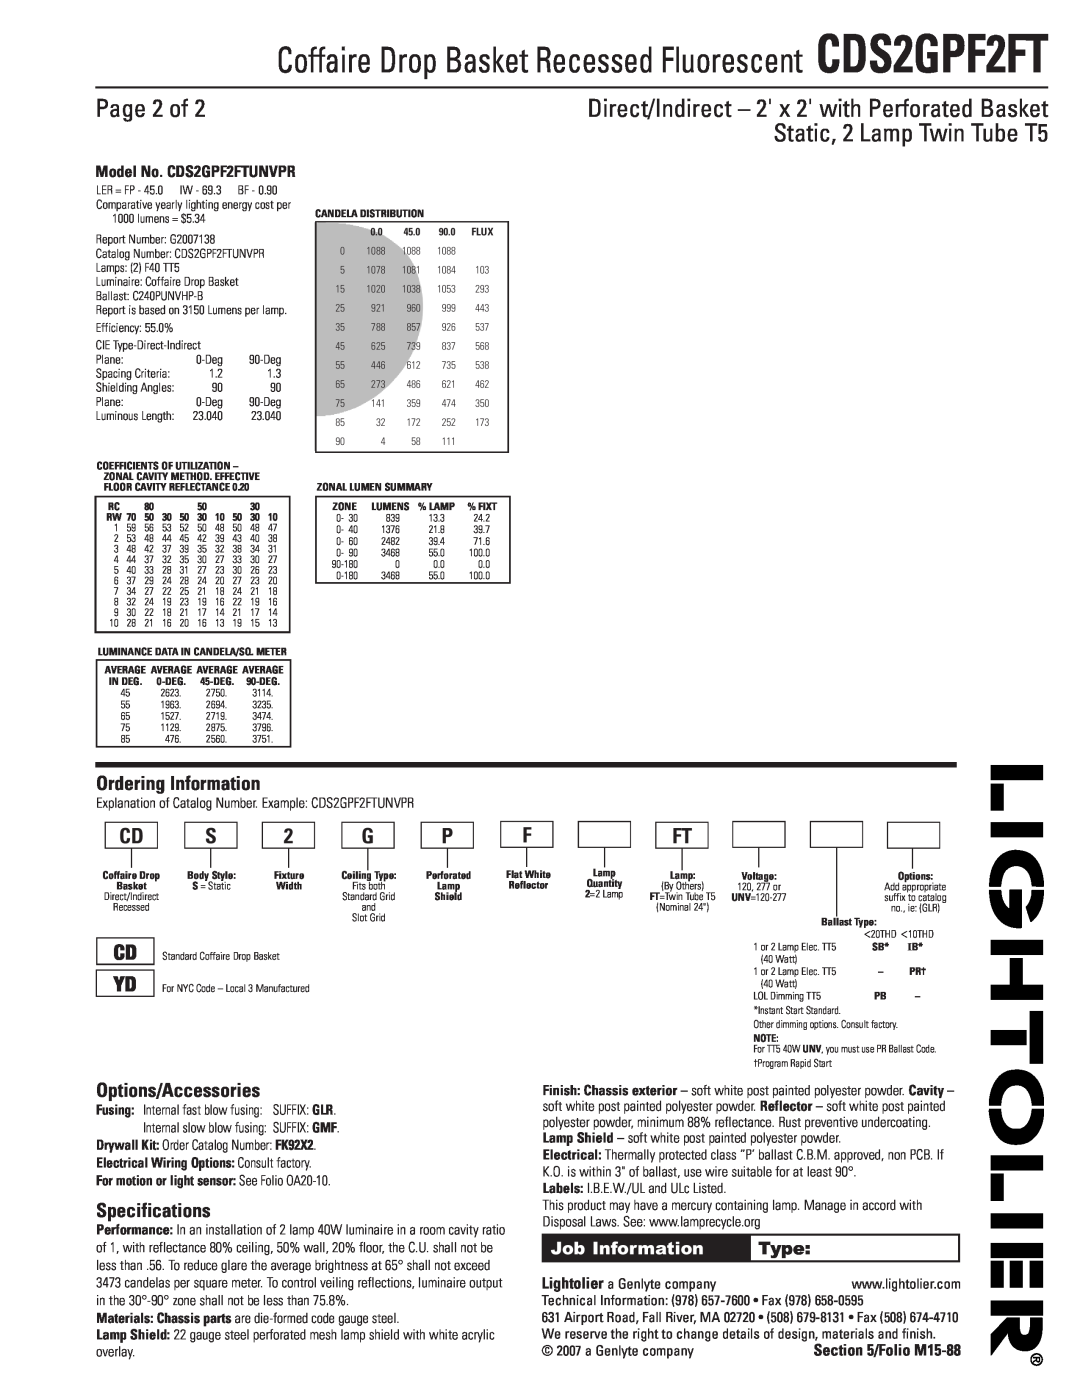 Lightolier CDS2GPF2FT Page 2 of, Direct/Indirect - 2 x 2 with Perforated Basket, Static, 2 Lamp Twin Tube T5, Folio M15-88 